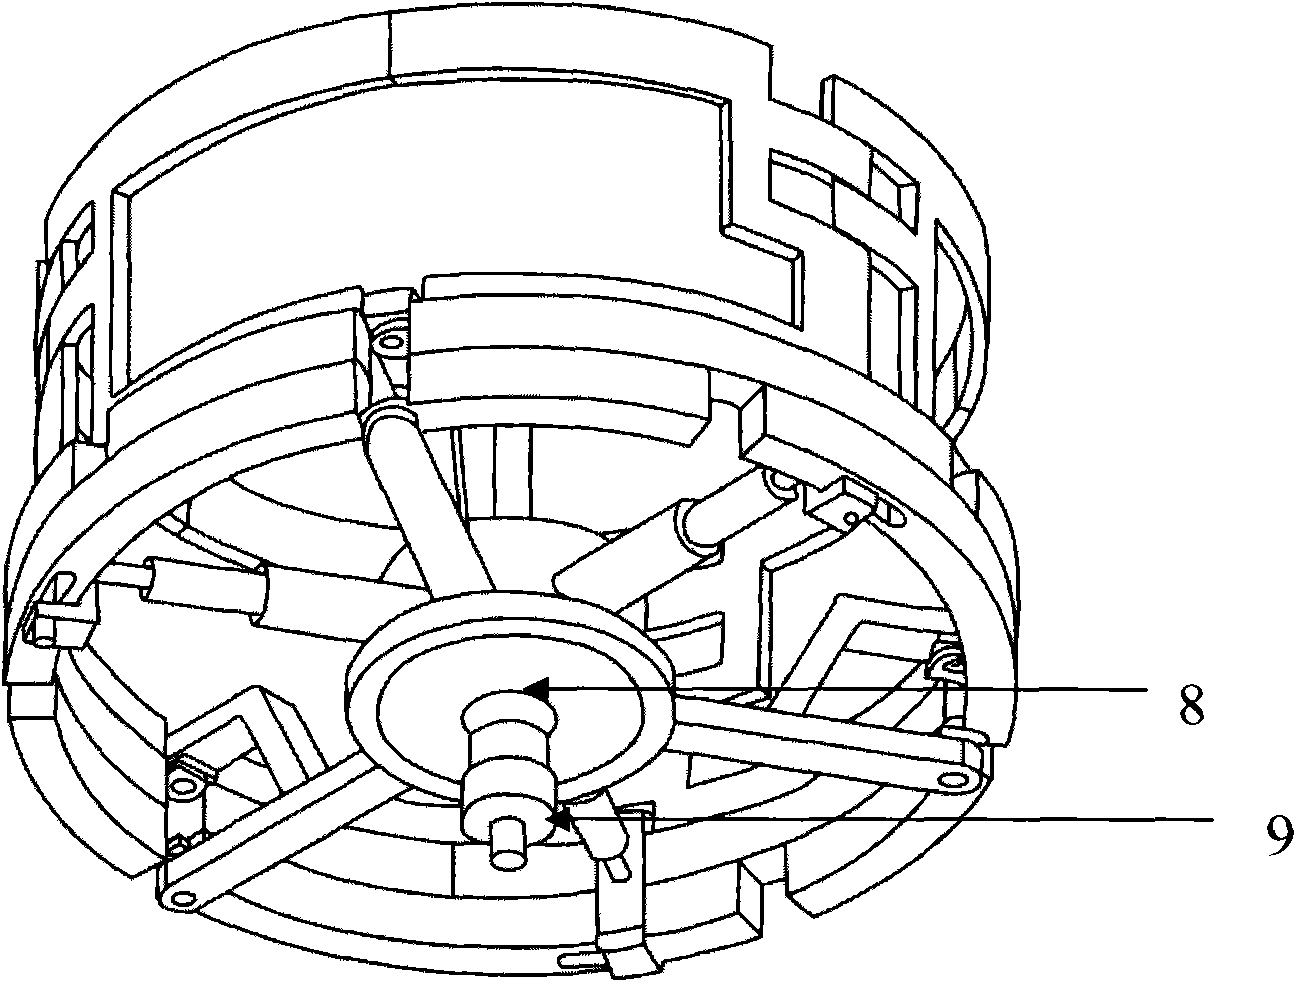 Wheel-tracked freely switching gear train device